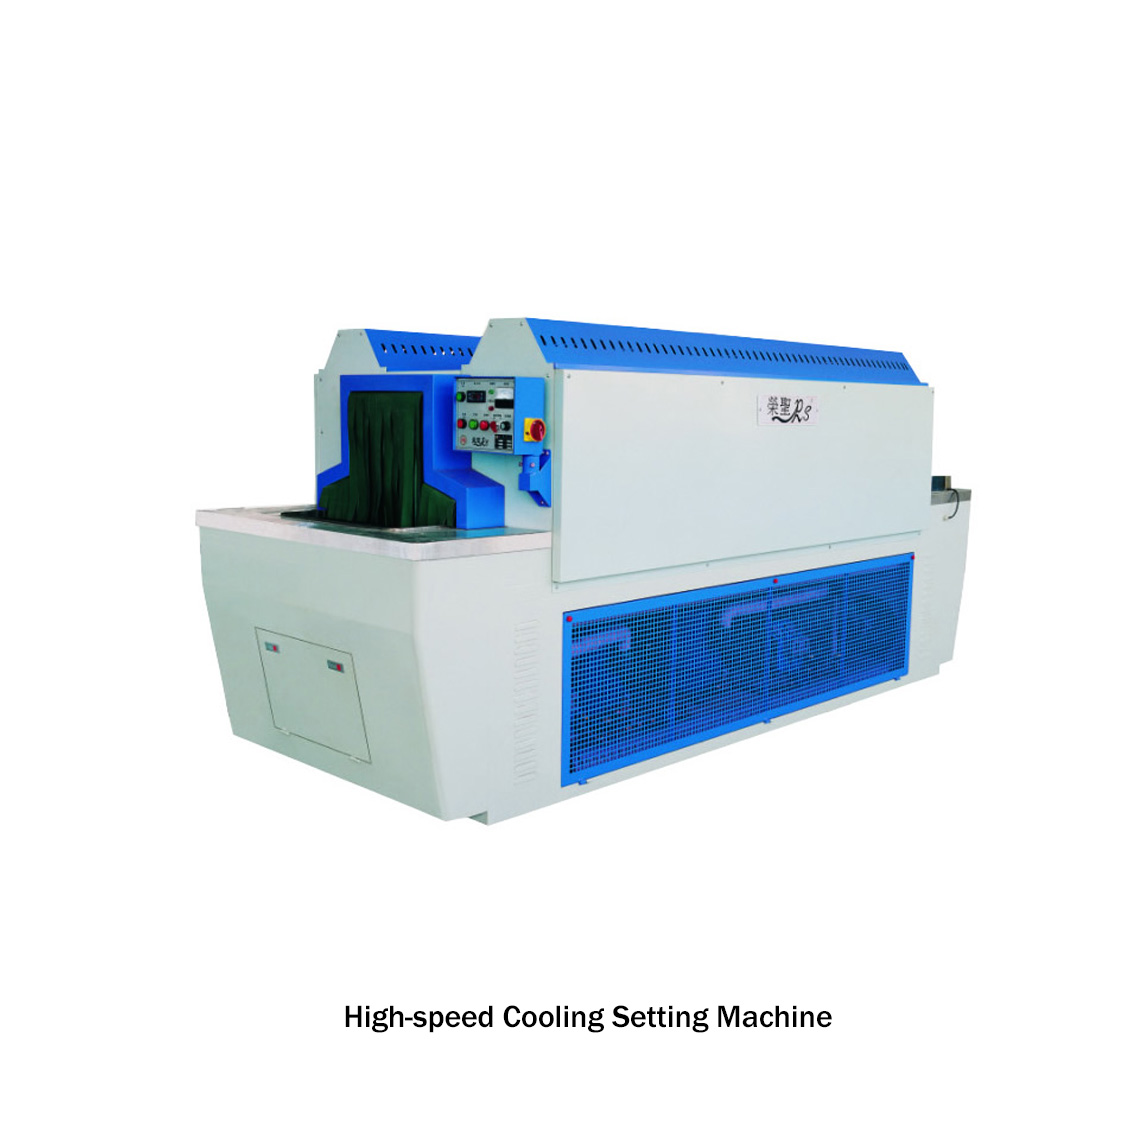 High-speed Cooling Setting Machine